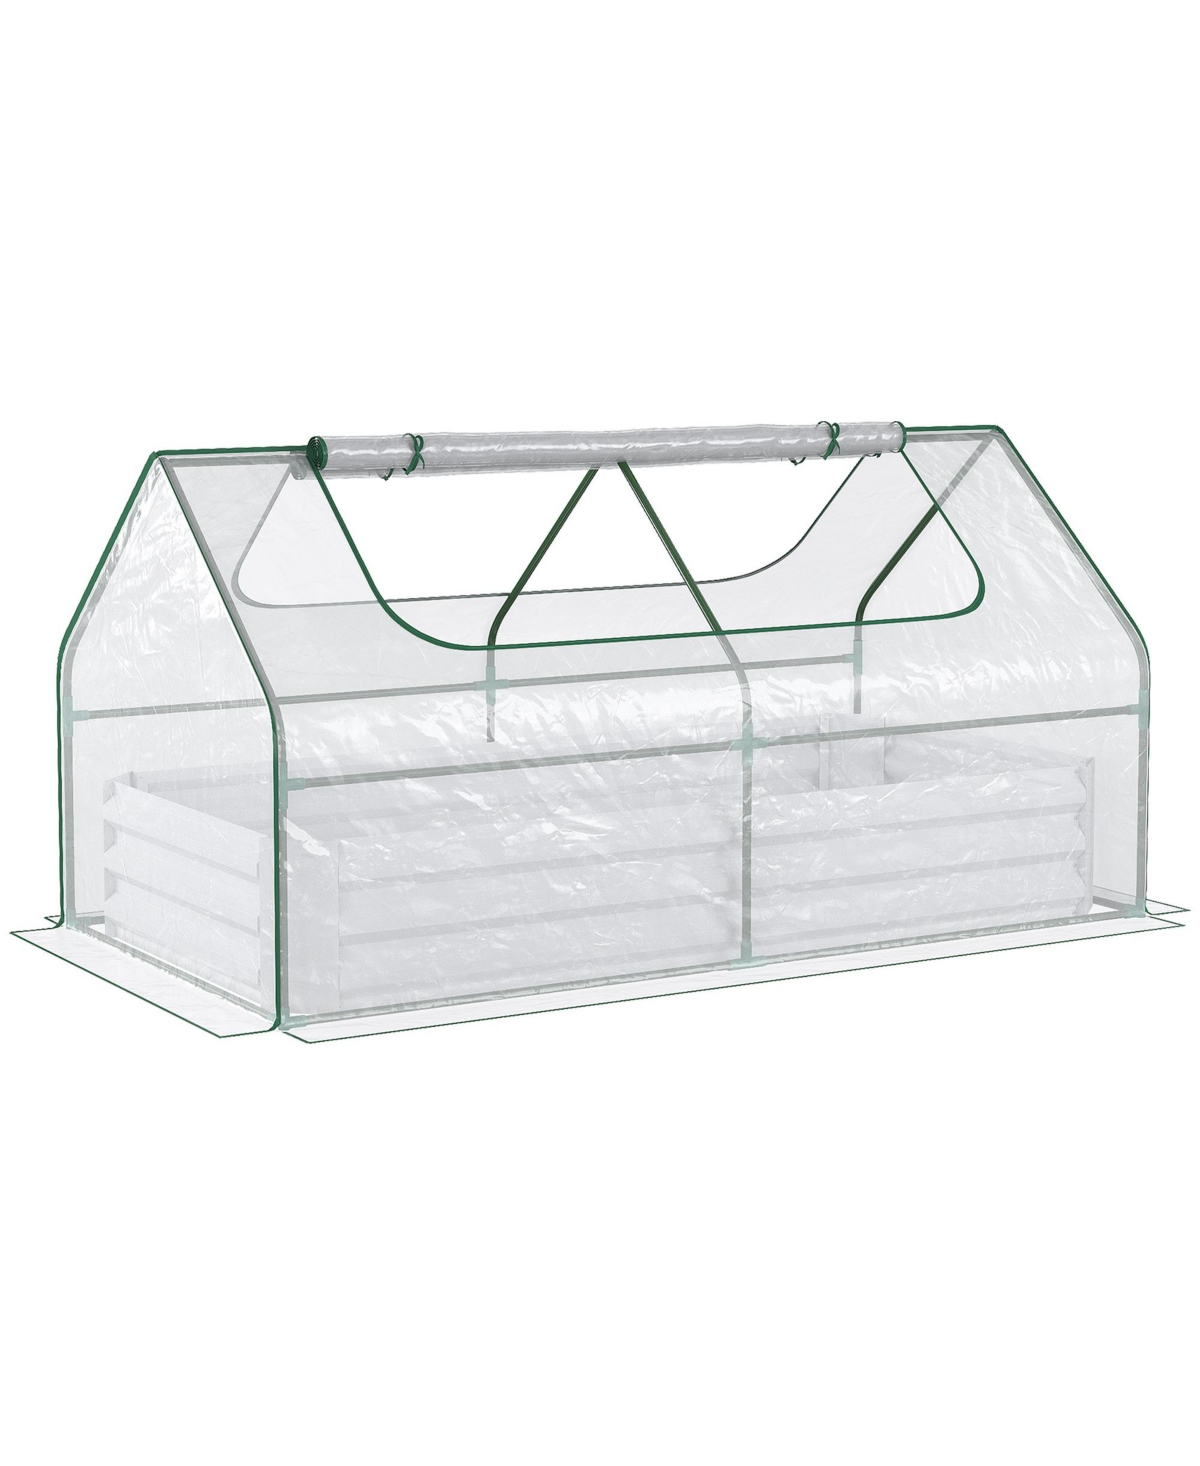 Galvanized Raised Garden Bed with Mini Greenhouse Cover, Outdoor Metal Planter Box with 2 Roll-Up Windows for Growing Flowers, Fruits, Vegeta